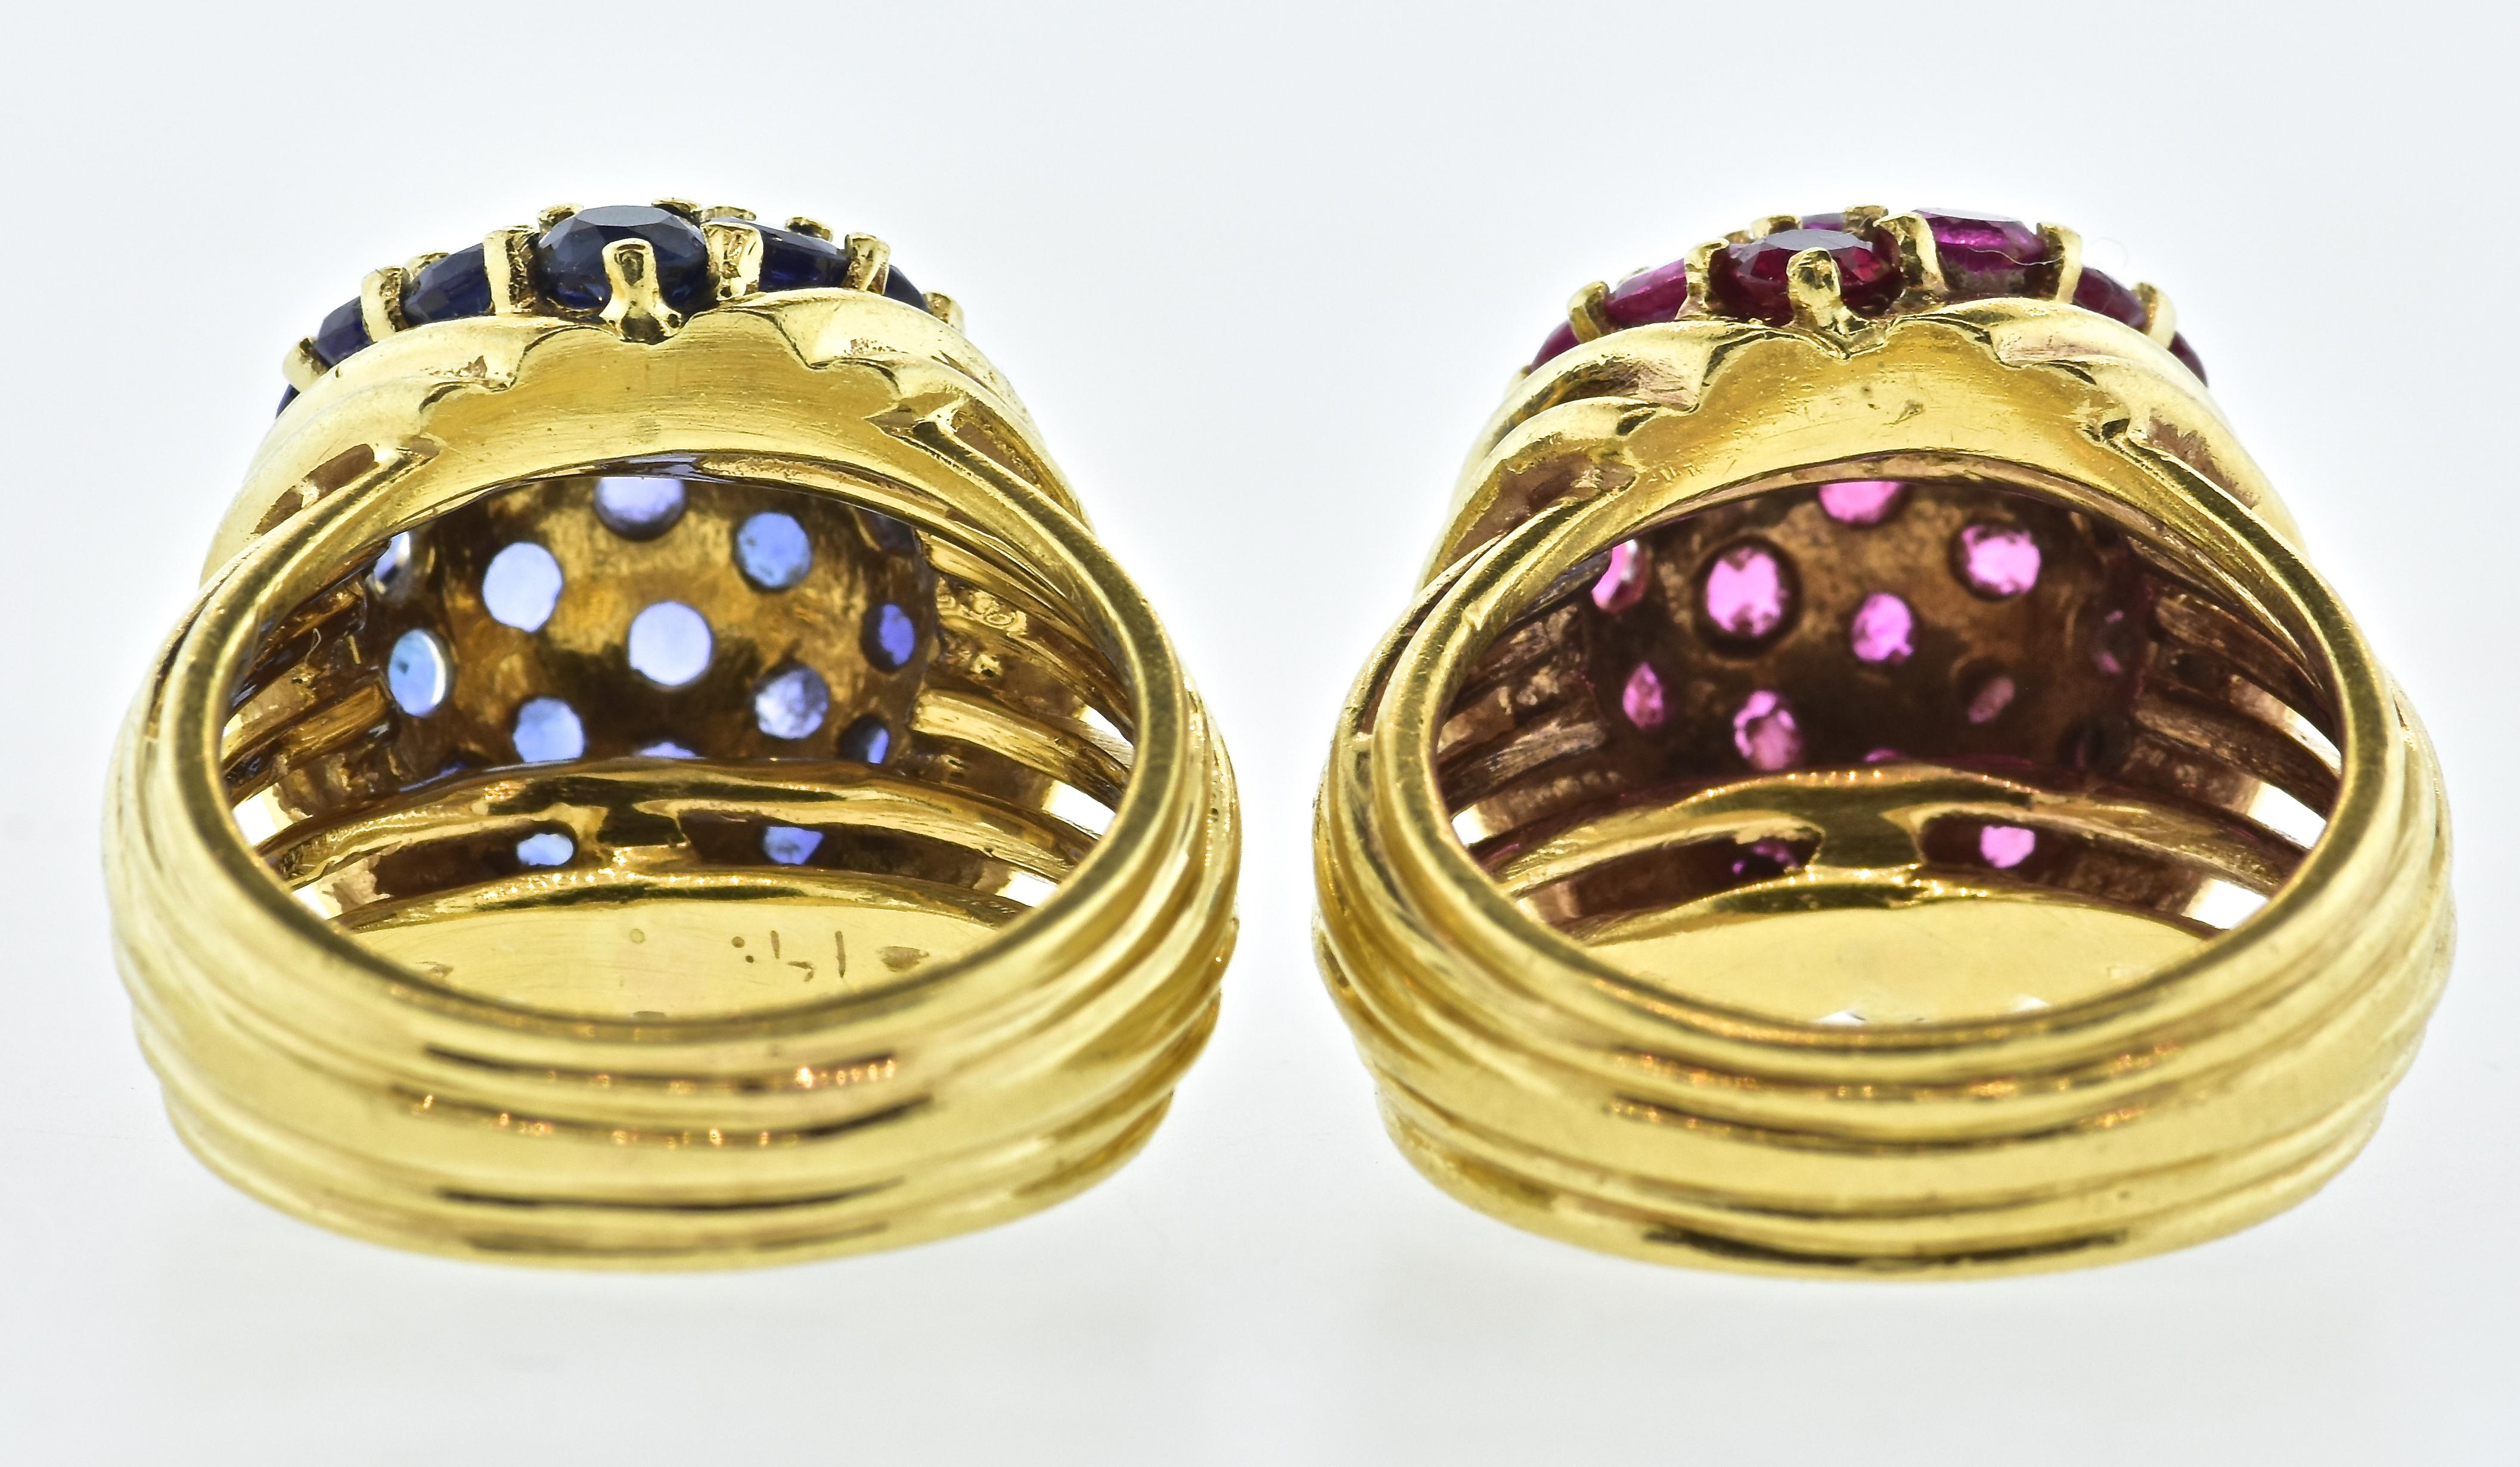 Brilliant Cut Retro Sapphire and Rubies Dome Style Vintage Yellow Gold Rings, circa 1955, Pair